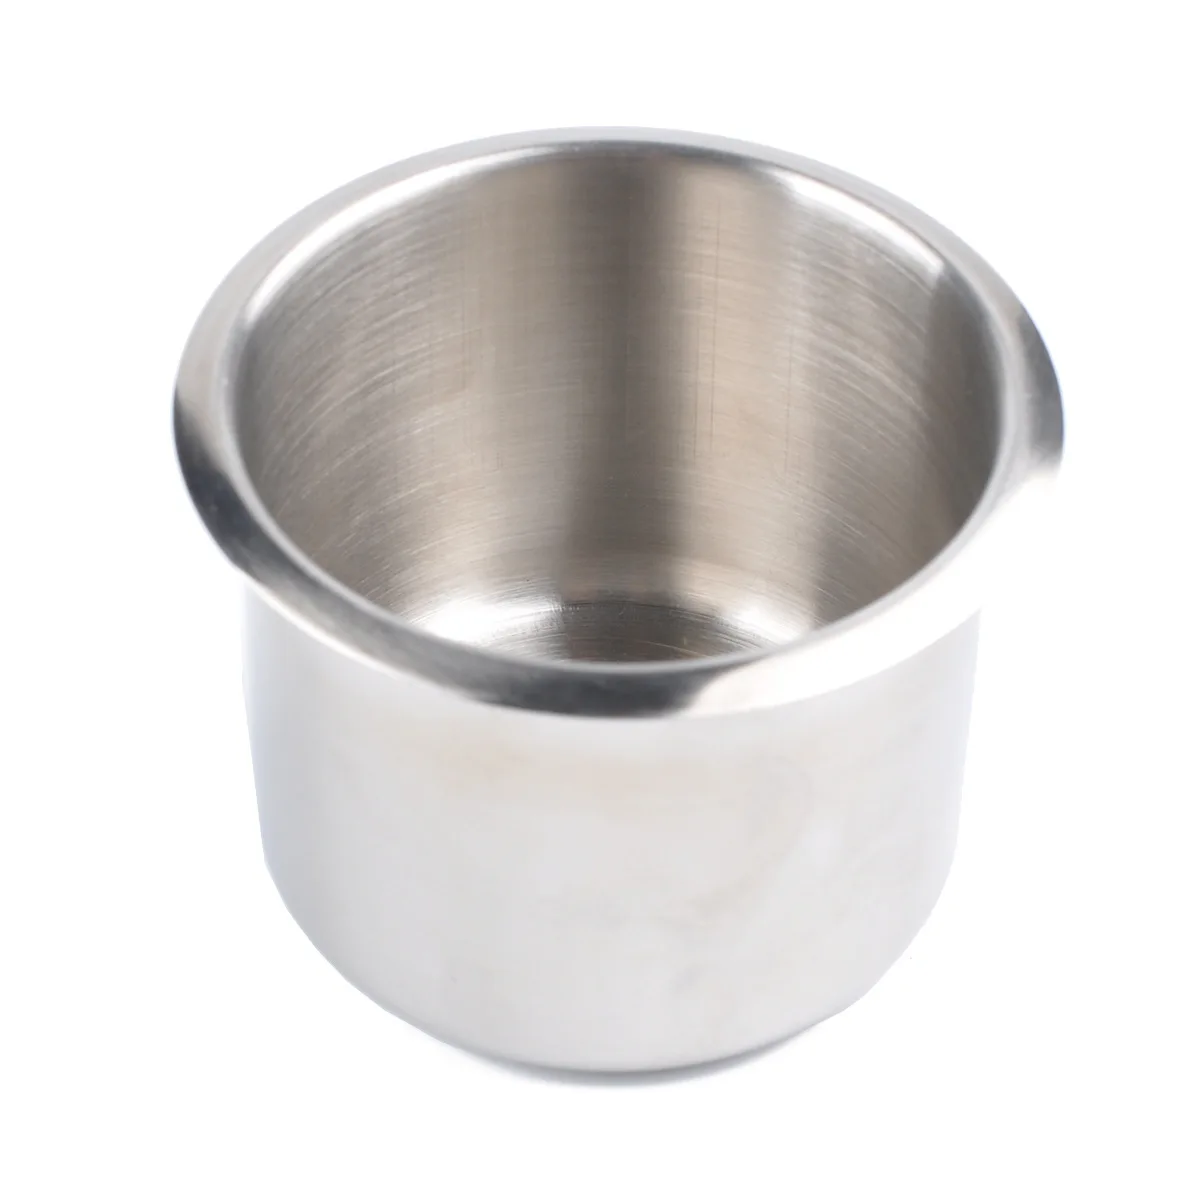 Car Cup Holder Stainless Steel Recessed Water Cup Drink Holder RV Accessories stainless steel restaurant menu place card holders table top metal name number card holder for drink cafe wedding